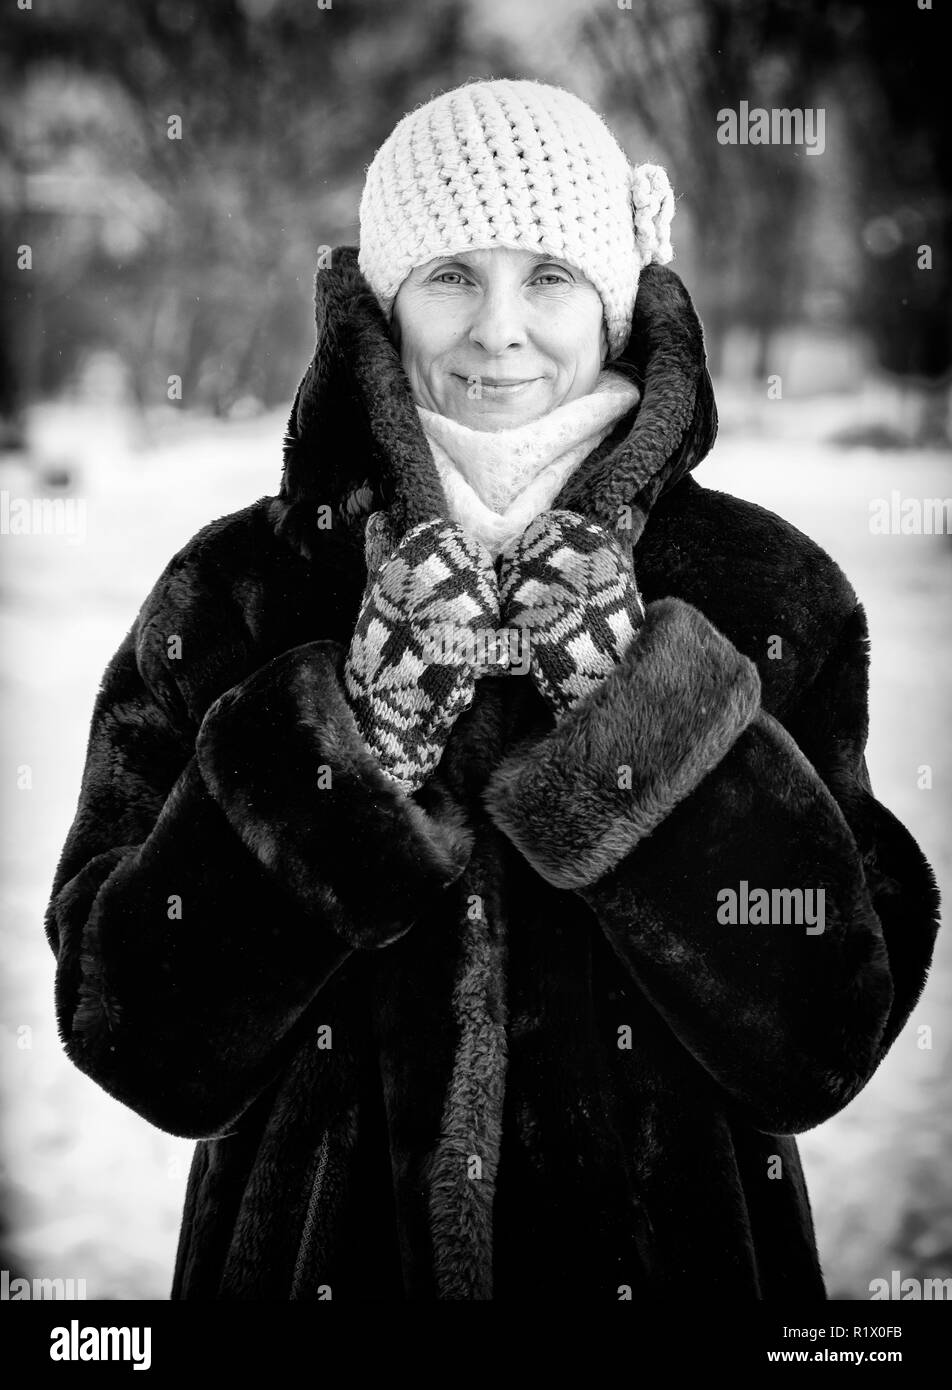 A winter portrait of a smiling senior adult woman wearing a wool cap, a scarf and colored gloves, with a snow background Stock Photo